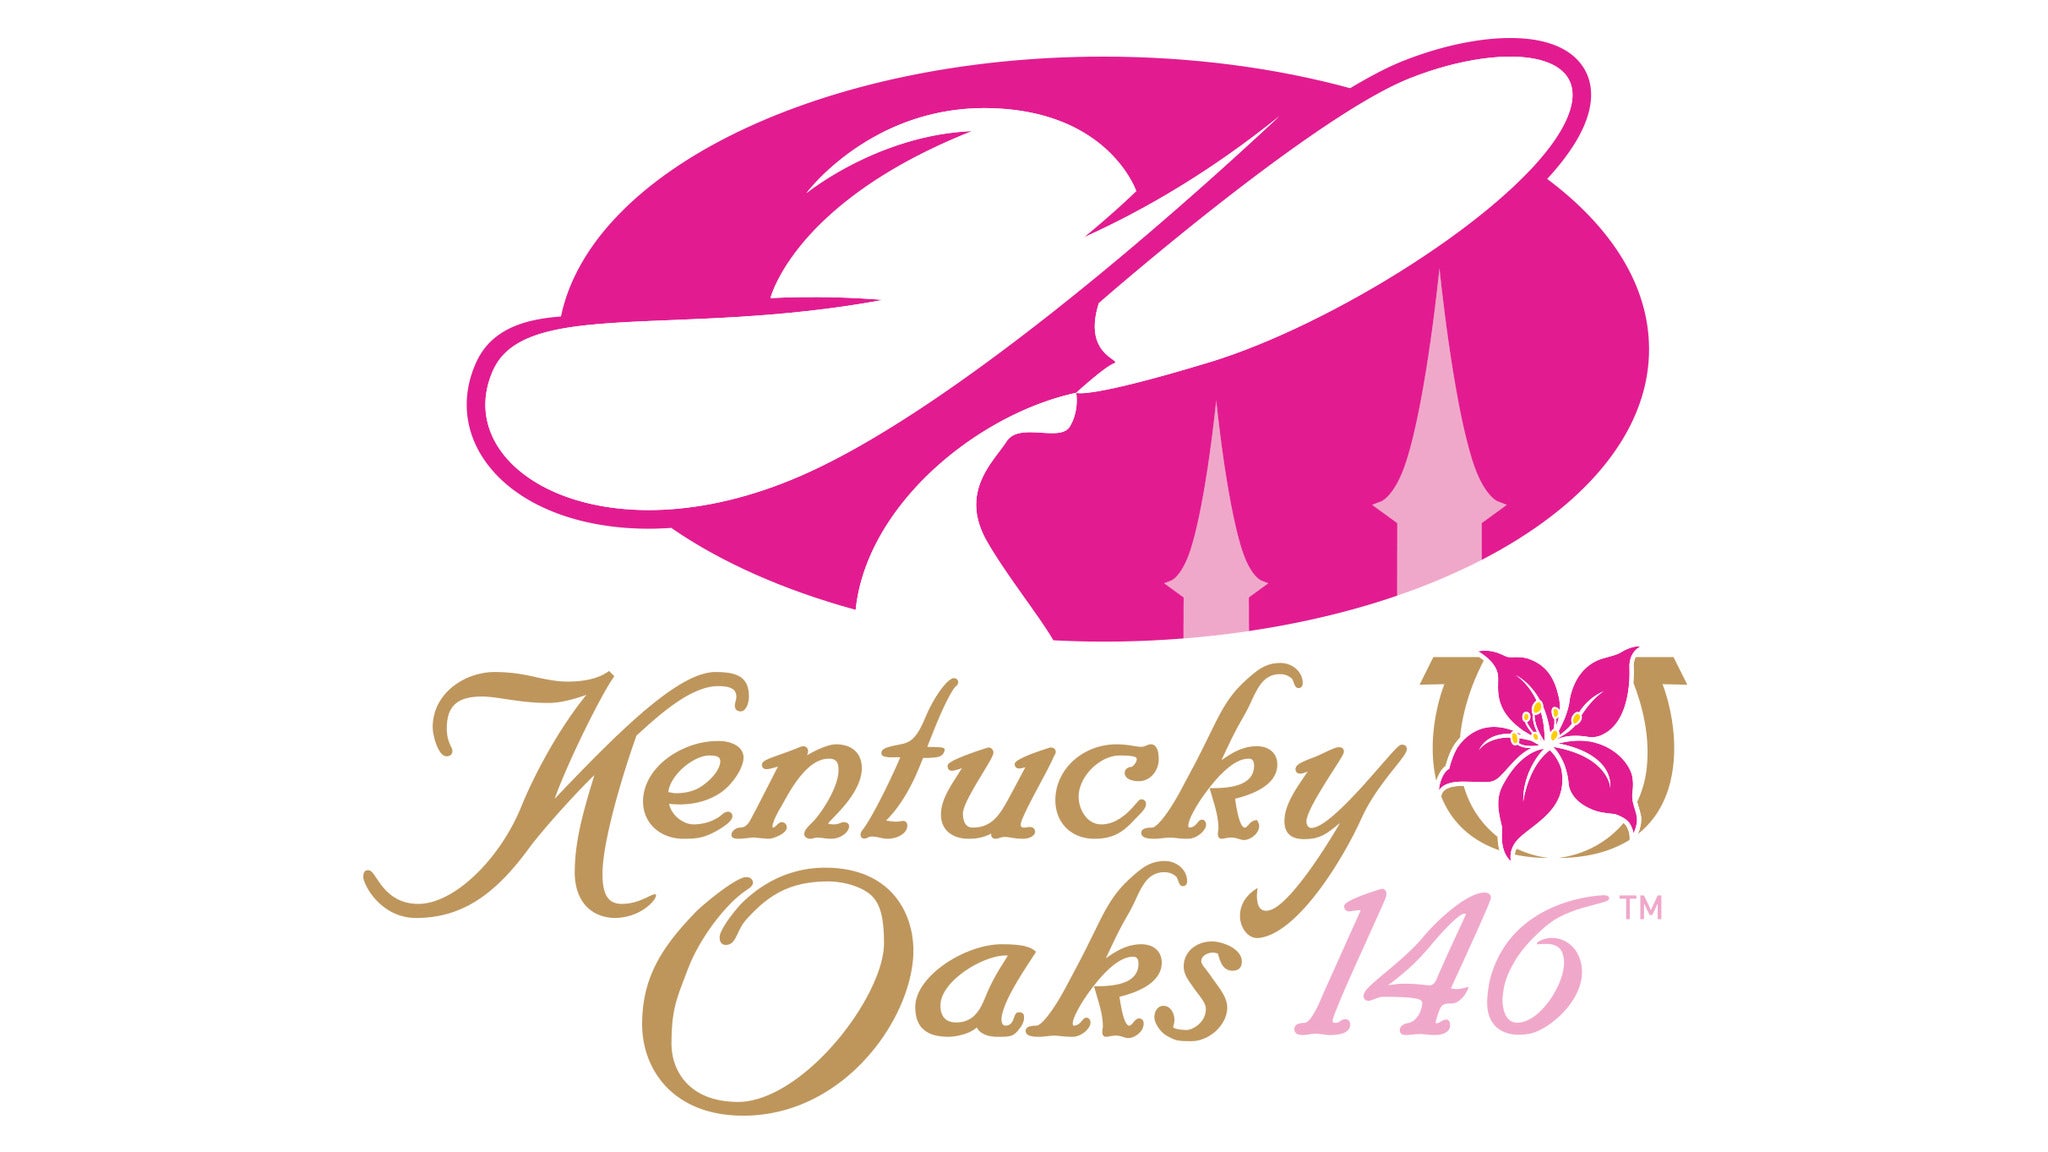 146th Kentucky Oaks - Infield & Paddock General Admission Single Day in Louisville promo photo for Standard Purchase Pricing presale offer code